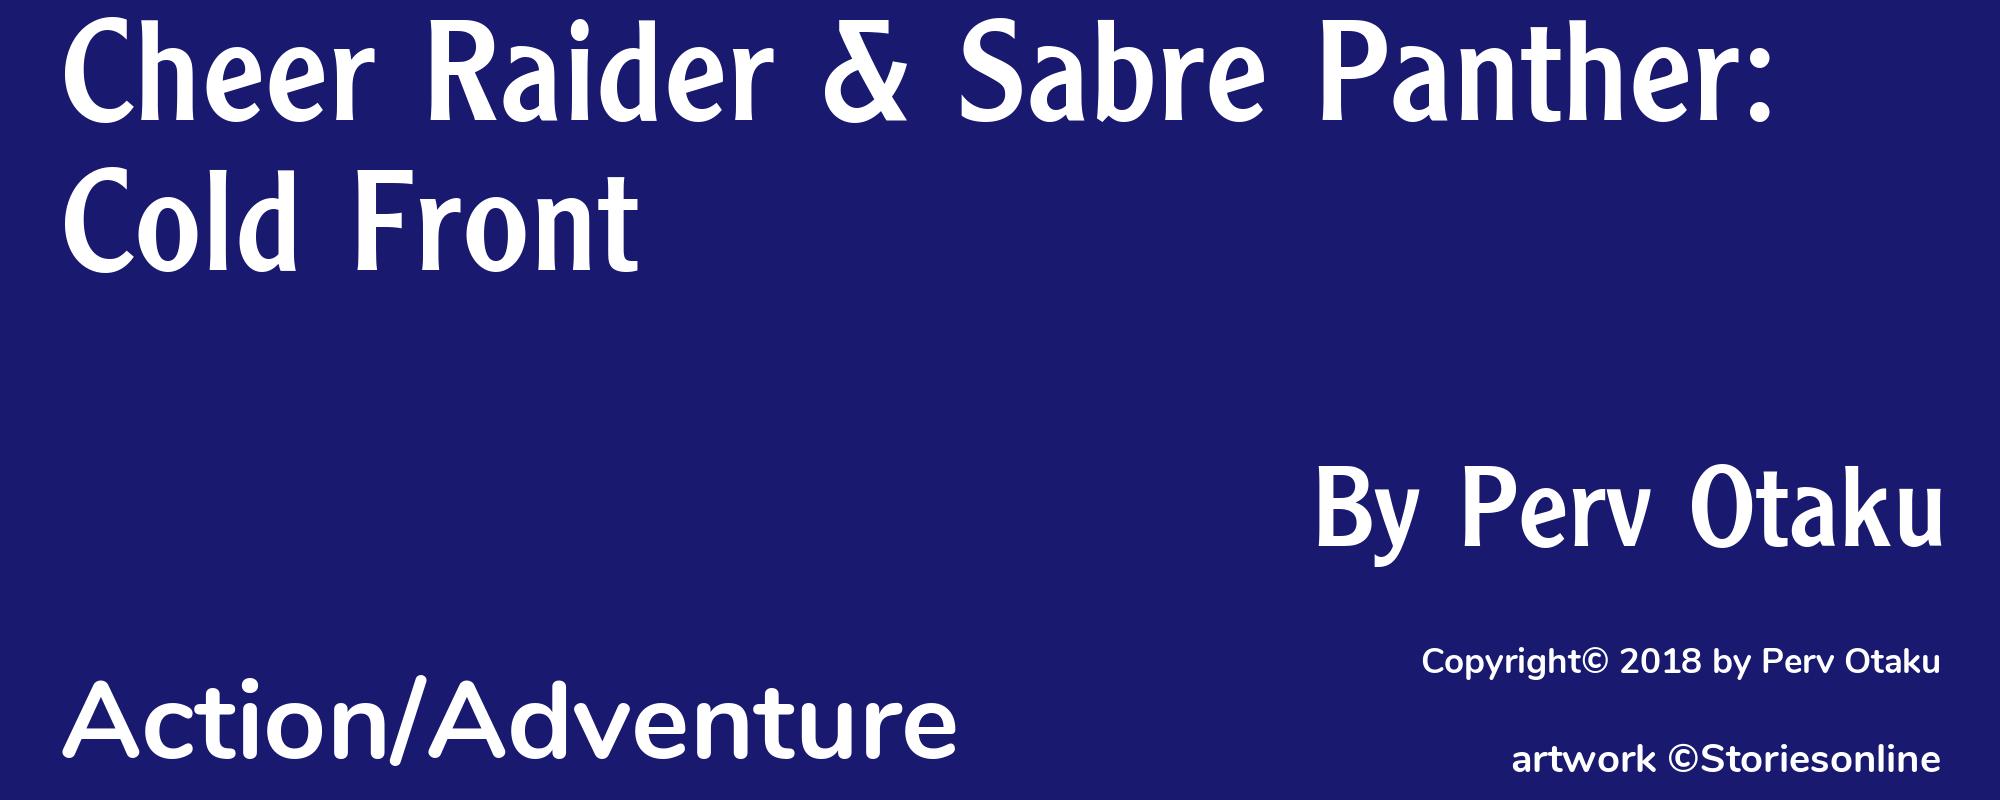 Cheer Raider & Sabre Panther: Cold Front - Cover